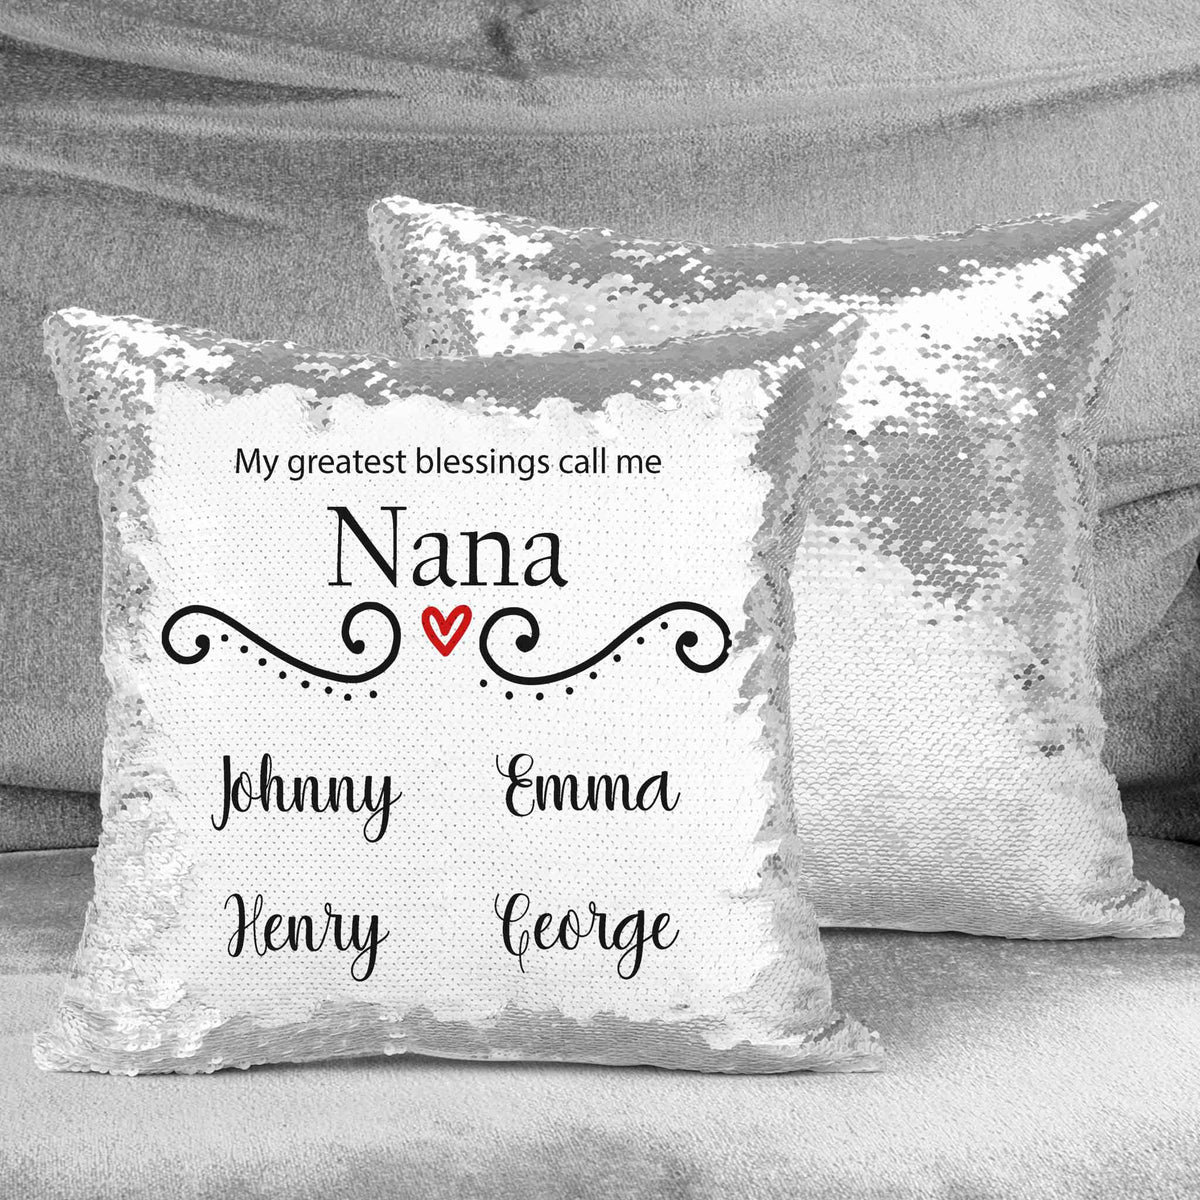 Personalized Sequin Throw Pillow | Custom Sequin Pillow | Nana&#39;s Greatest Blessing